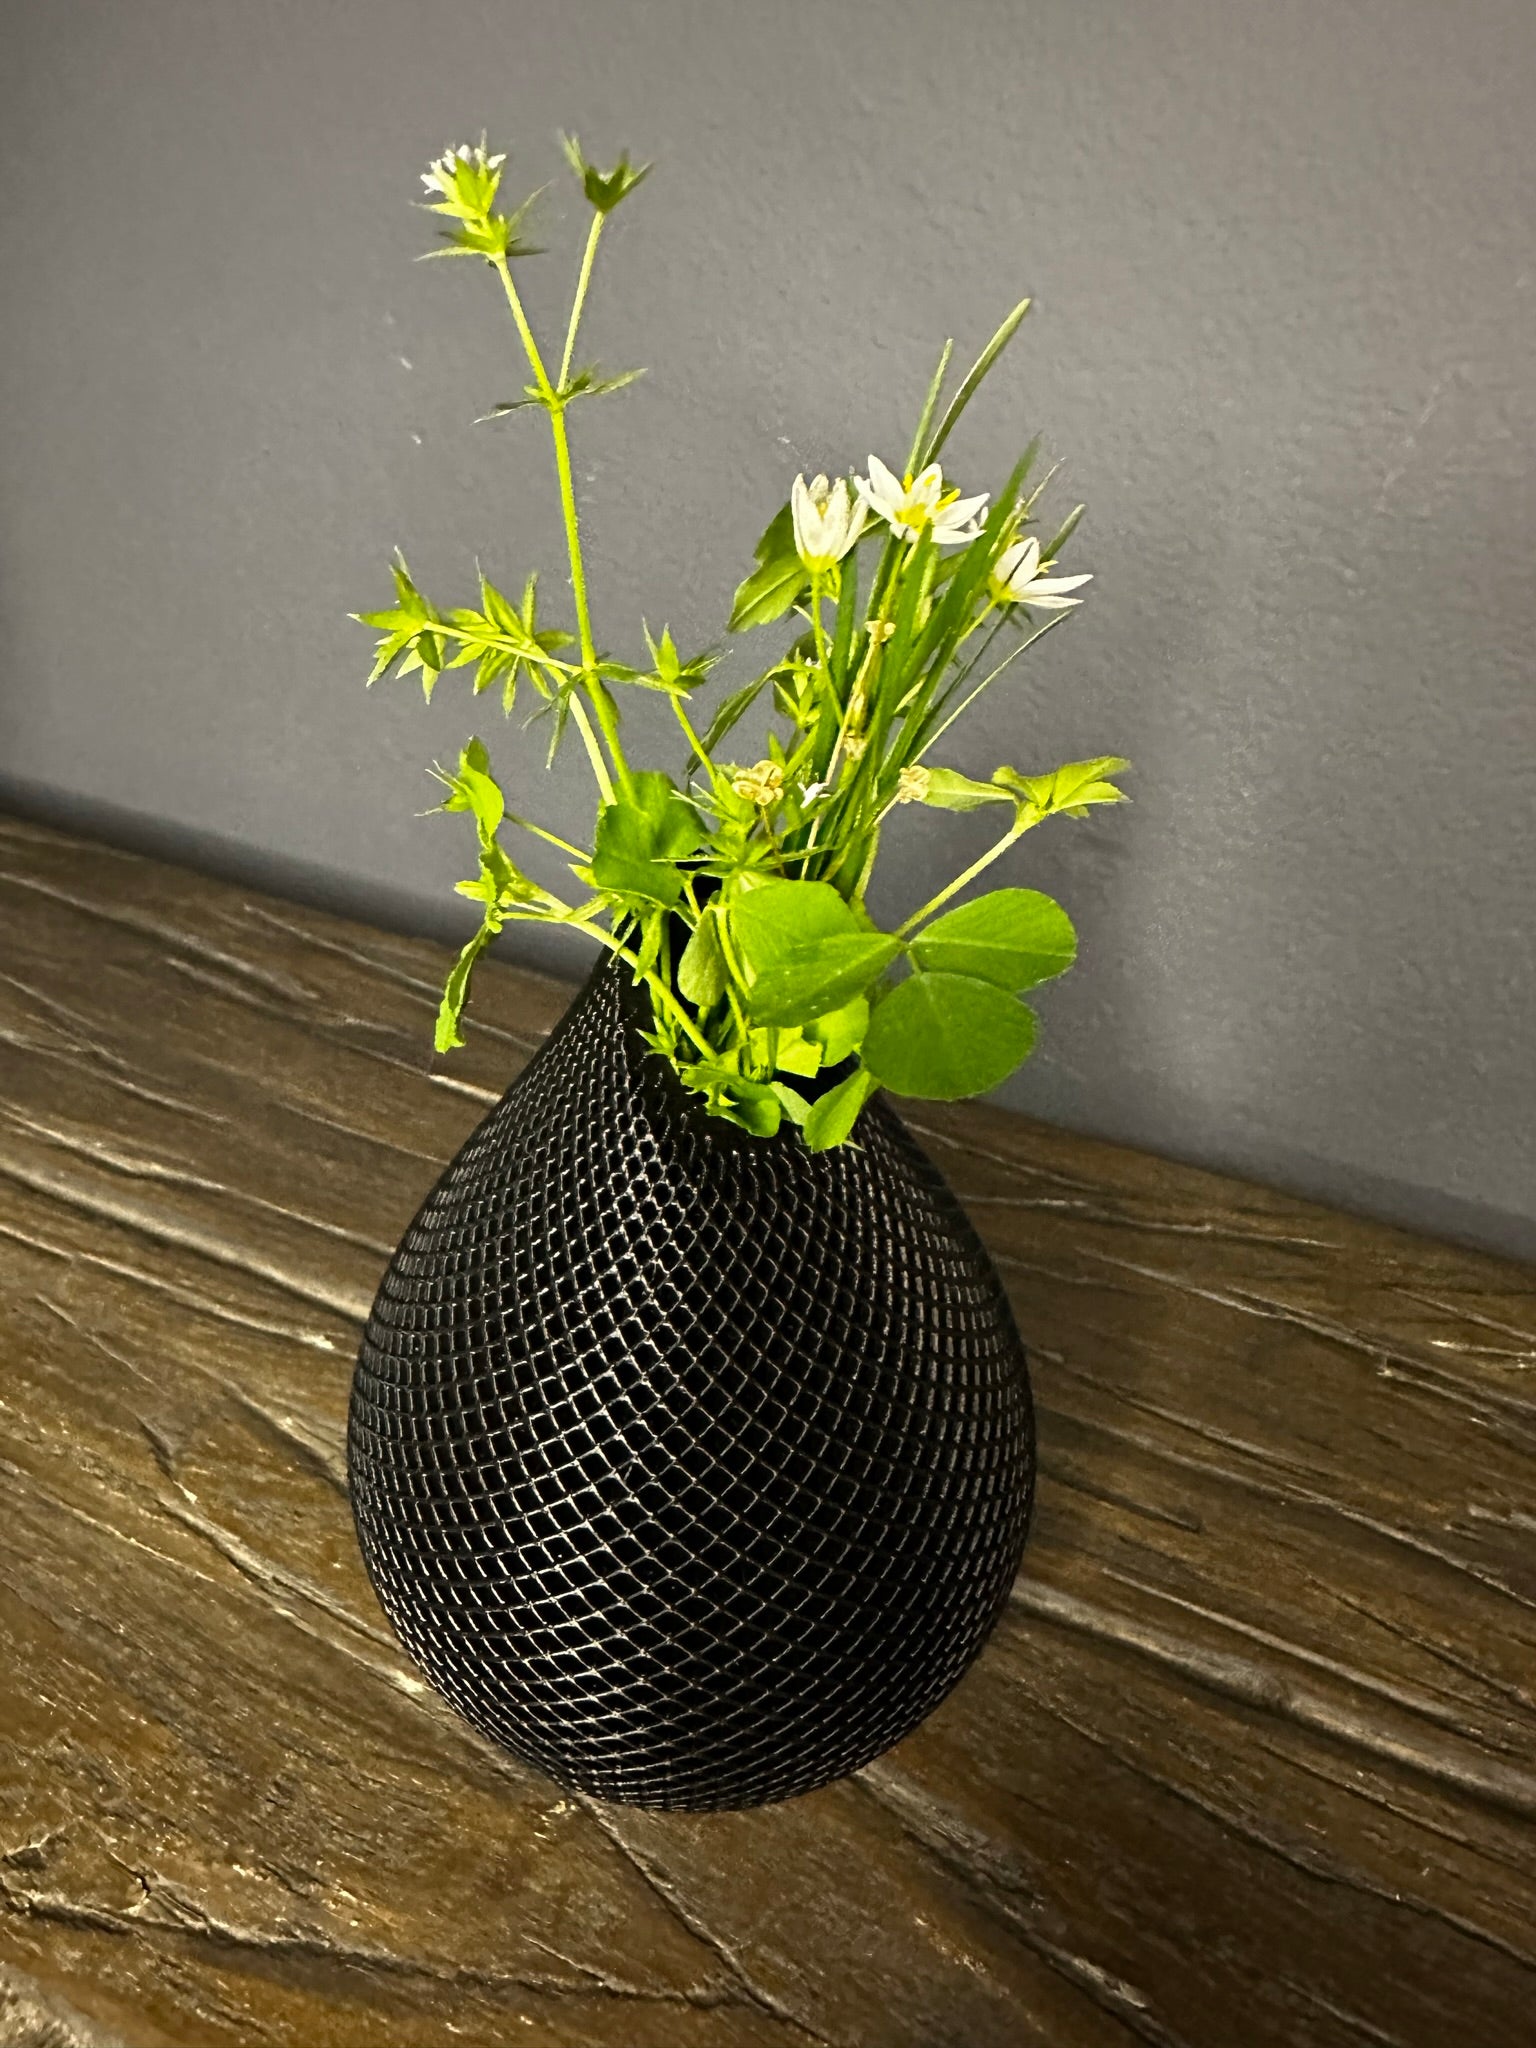 Photo of Handmade 3D Printed Vase in Black Color with Mesh Pattern with some flowers inside